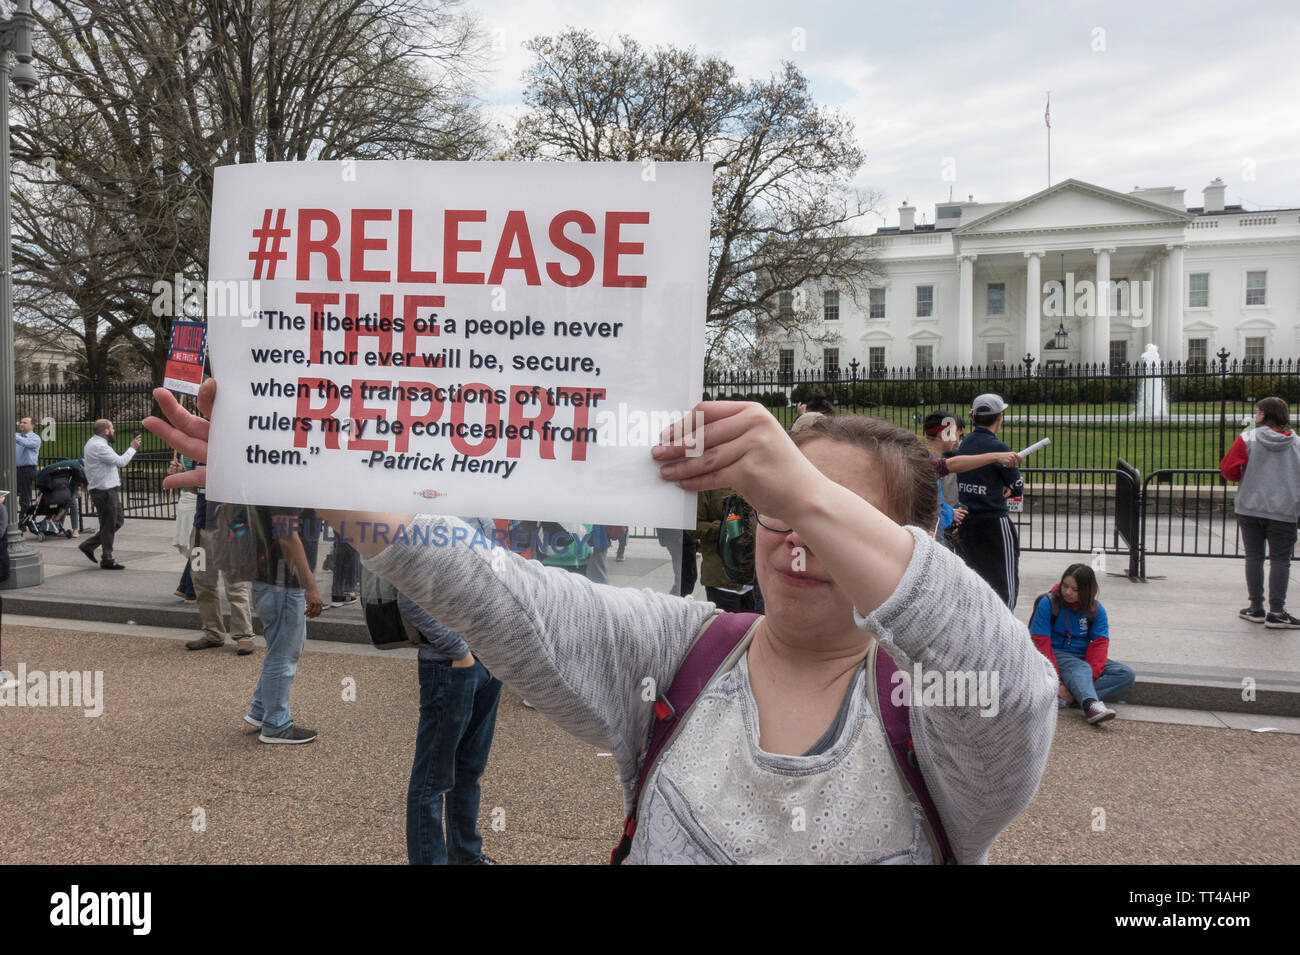 Protesting Attorney General William Barr and the Trump administration’s failure to release the unredacted Mueller Report.  Protest held in Lafayette Square across the street from the White House, April 4, 2019, Washington, DC. Demonstration was part of the National Day of Action, with protests held around the US. Stock Photo